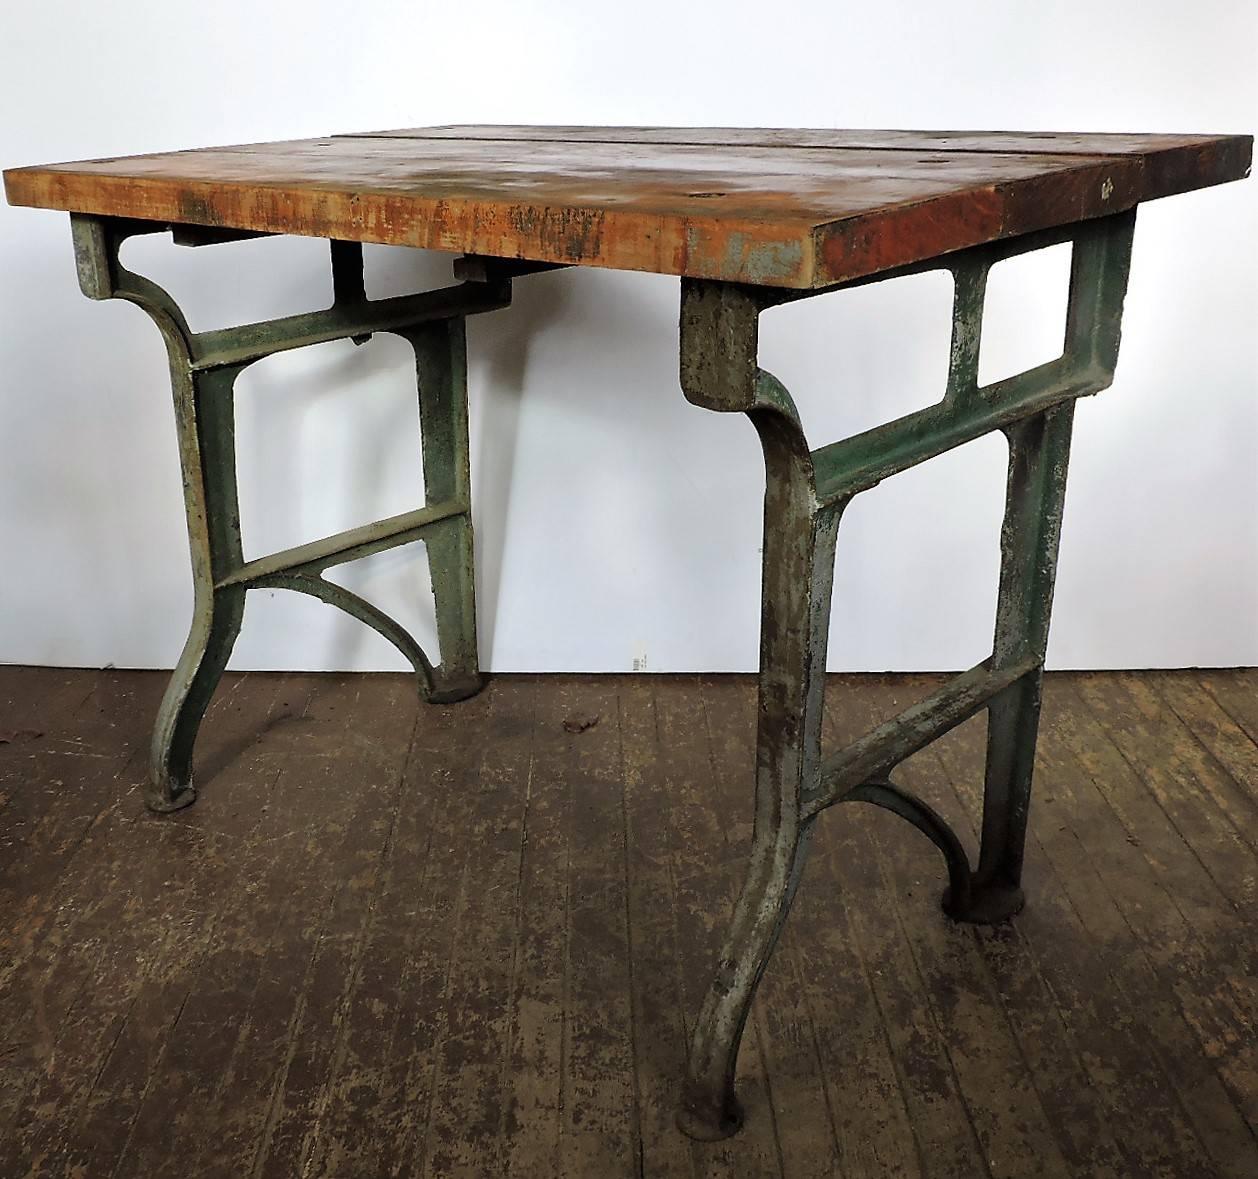 Antique American Industrial factory work table bench with original architectural cast iron base and large round inset round bolt riveted two inch thick three board wood block top. As found old surface to wood top and beautifully aged worn green